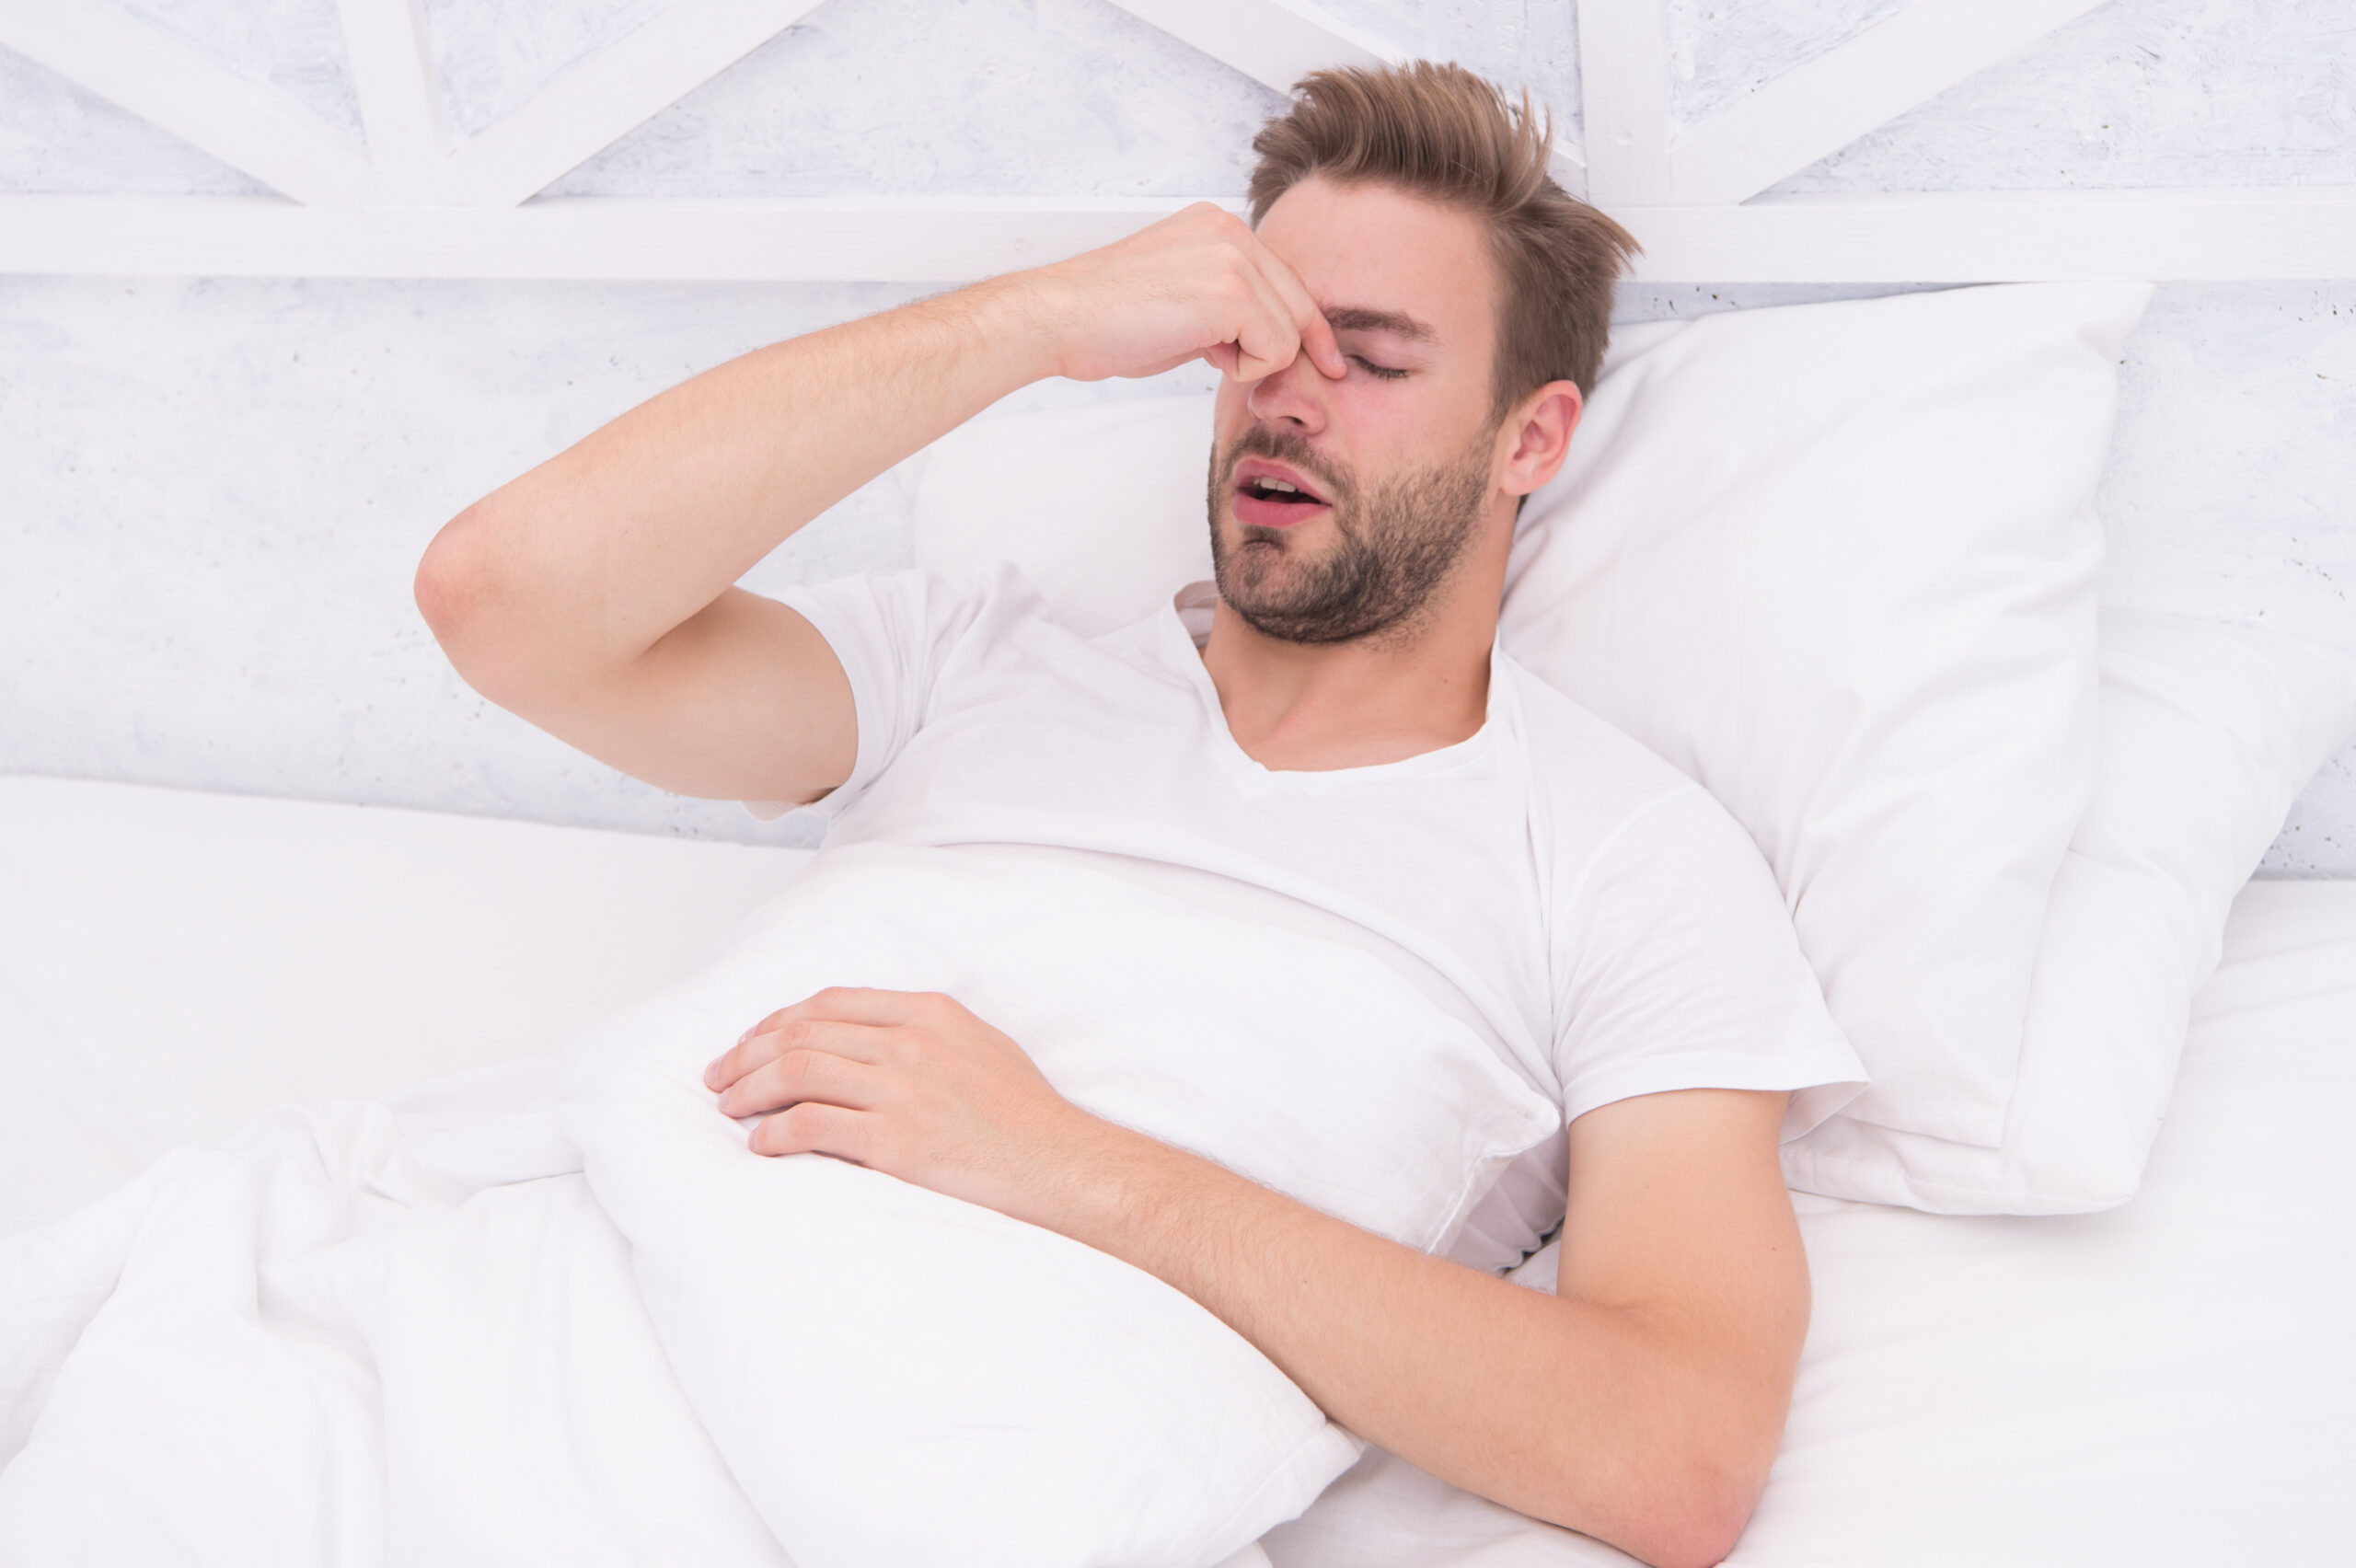 Snoring can increase risk headaches. Common symptom of sleep apnea. Causes of early morning headache. Migraine headaches. Sleep problems can lead to headaches in morning. Handsome man relaxing in bed.